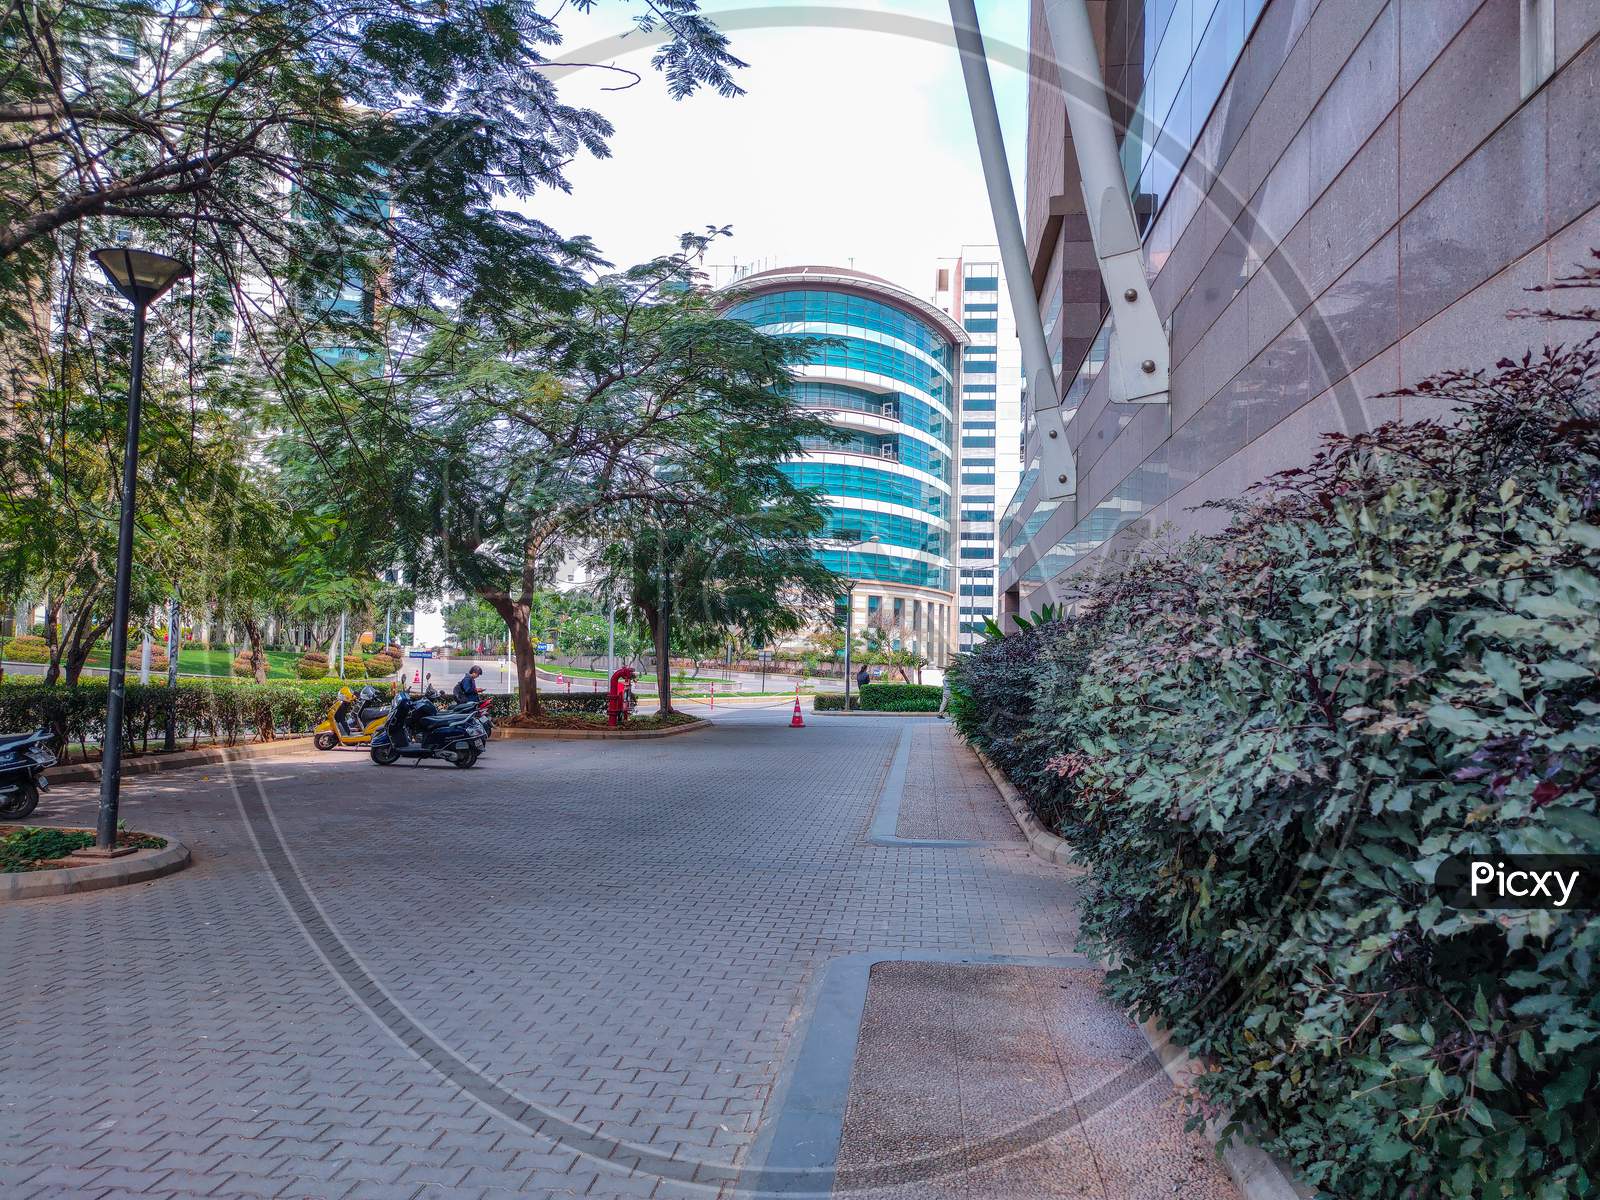 Bangalore, Karnataka, India- December 15Th 2019; Stock Photo Of A Building Or Architecture Of Multinational Company With Blue Glass Window On It , Bikes Parked At Parking Area In Front Of Building In The Afternoon Under Bright Sunlight.